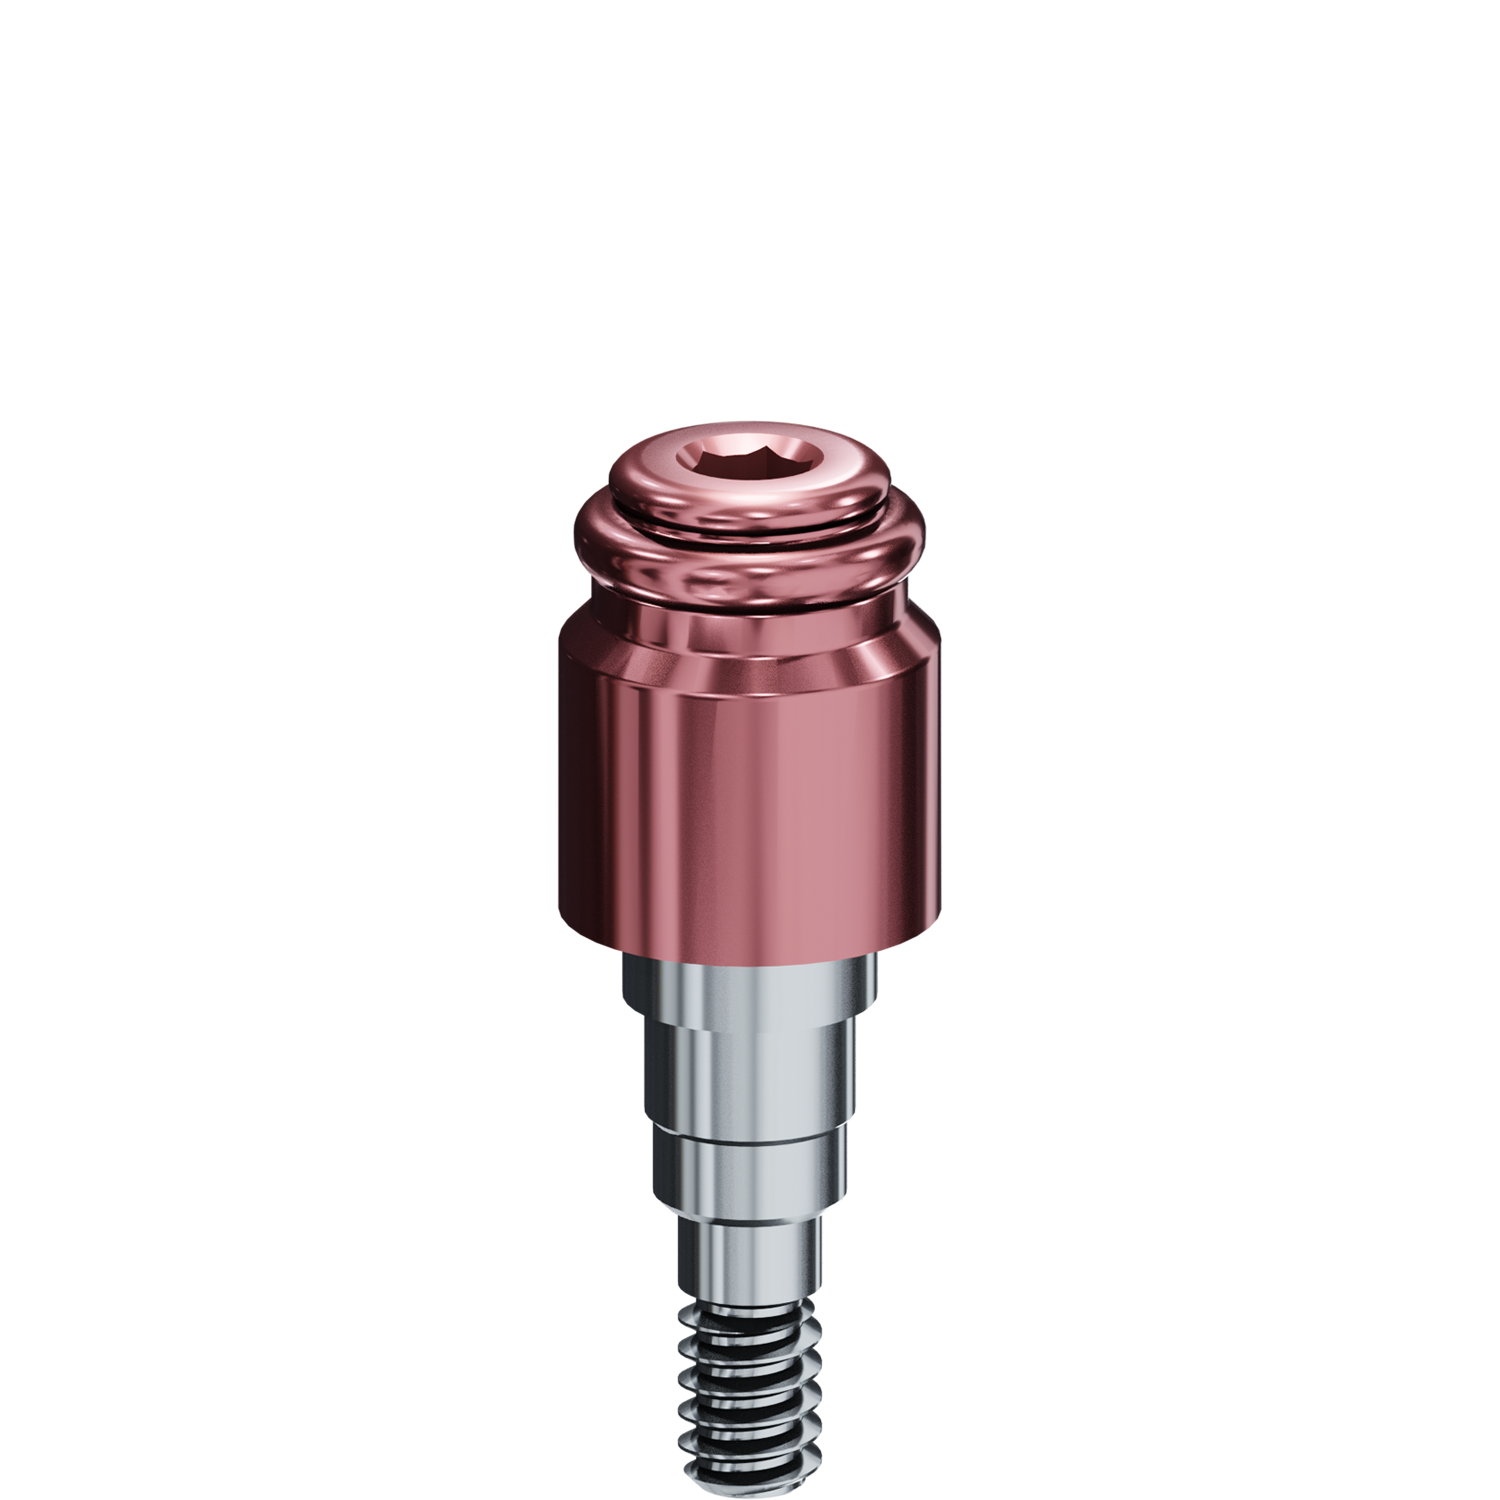 R-Tx Attachment System - Biomet 3i® - 4.1mm Certain Connection - 0.048" Drive - 3.0mm